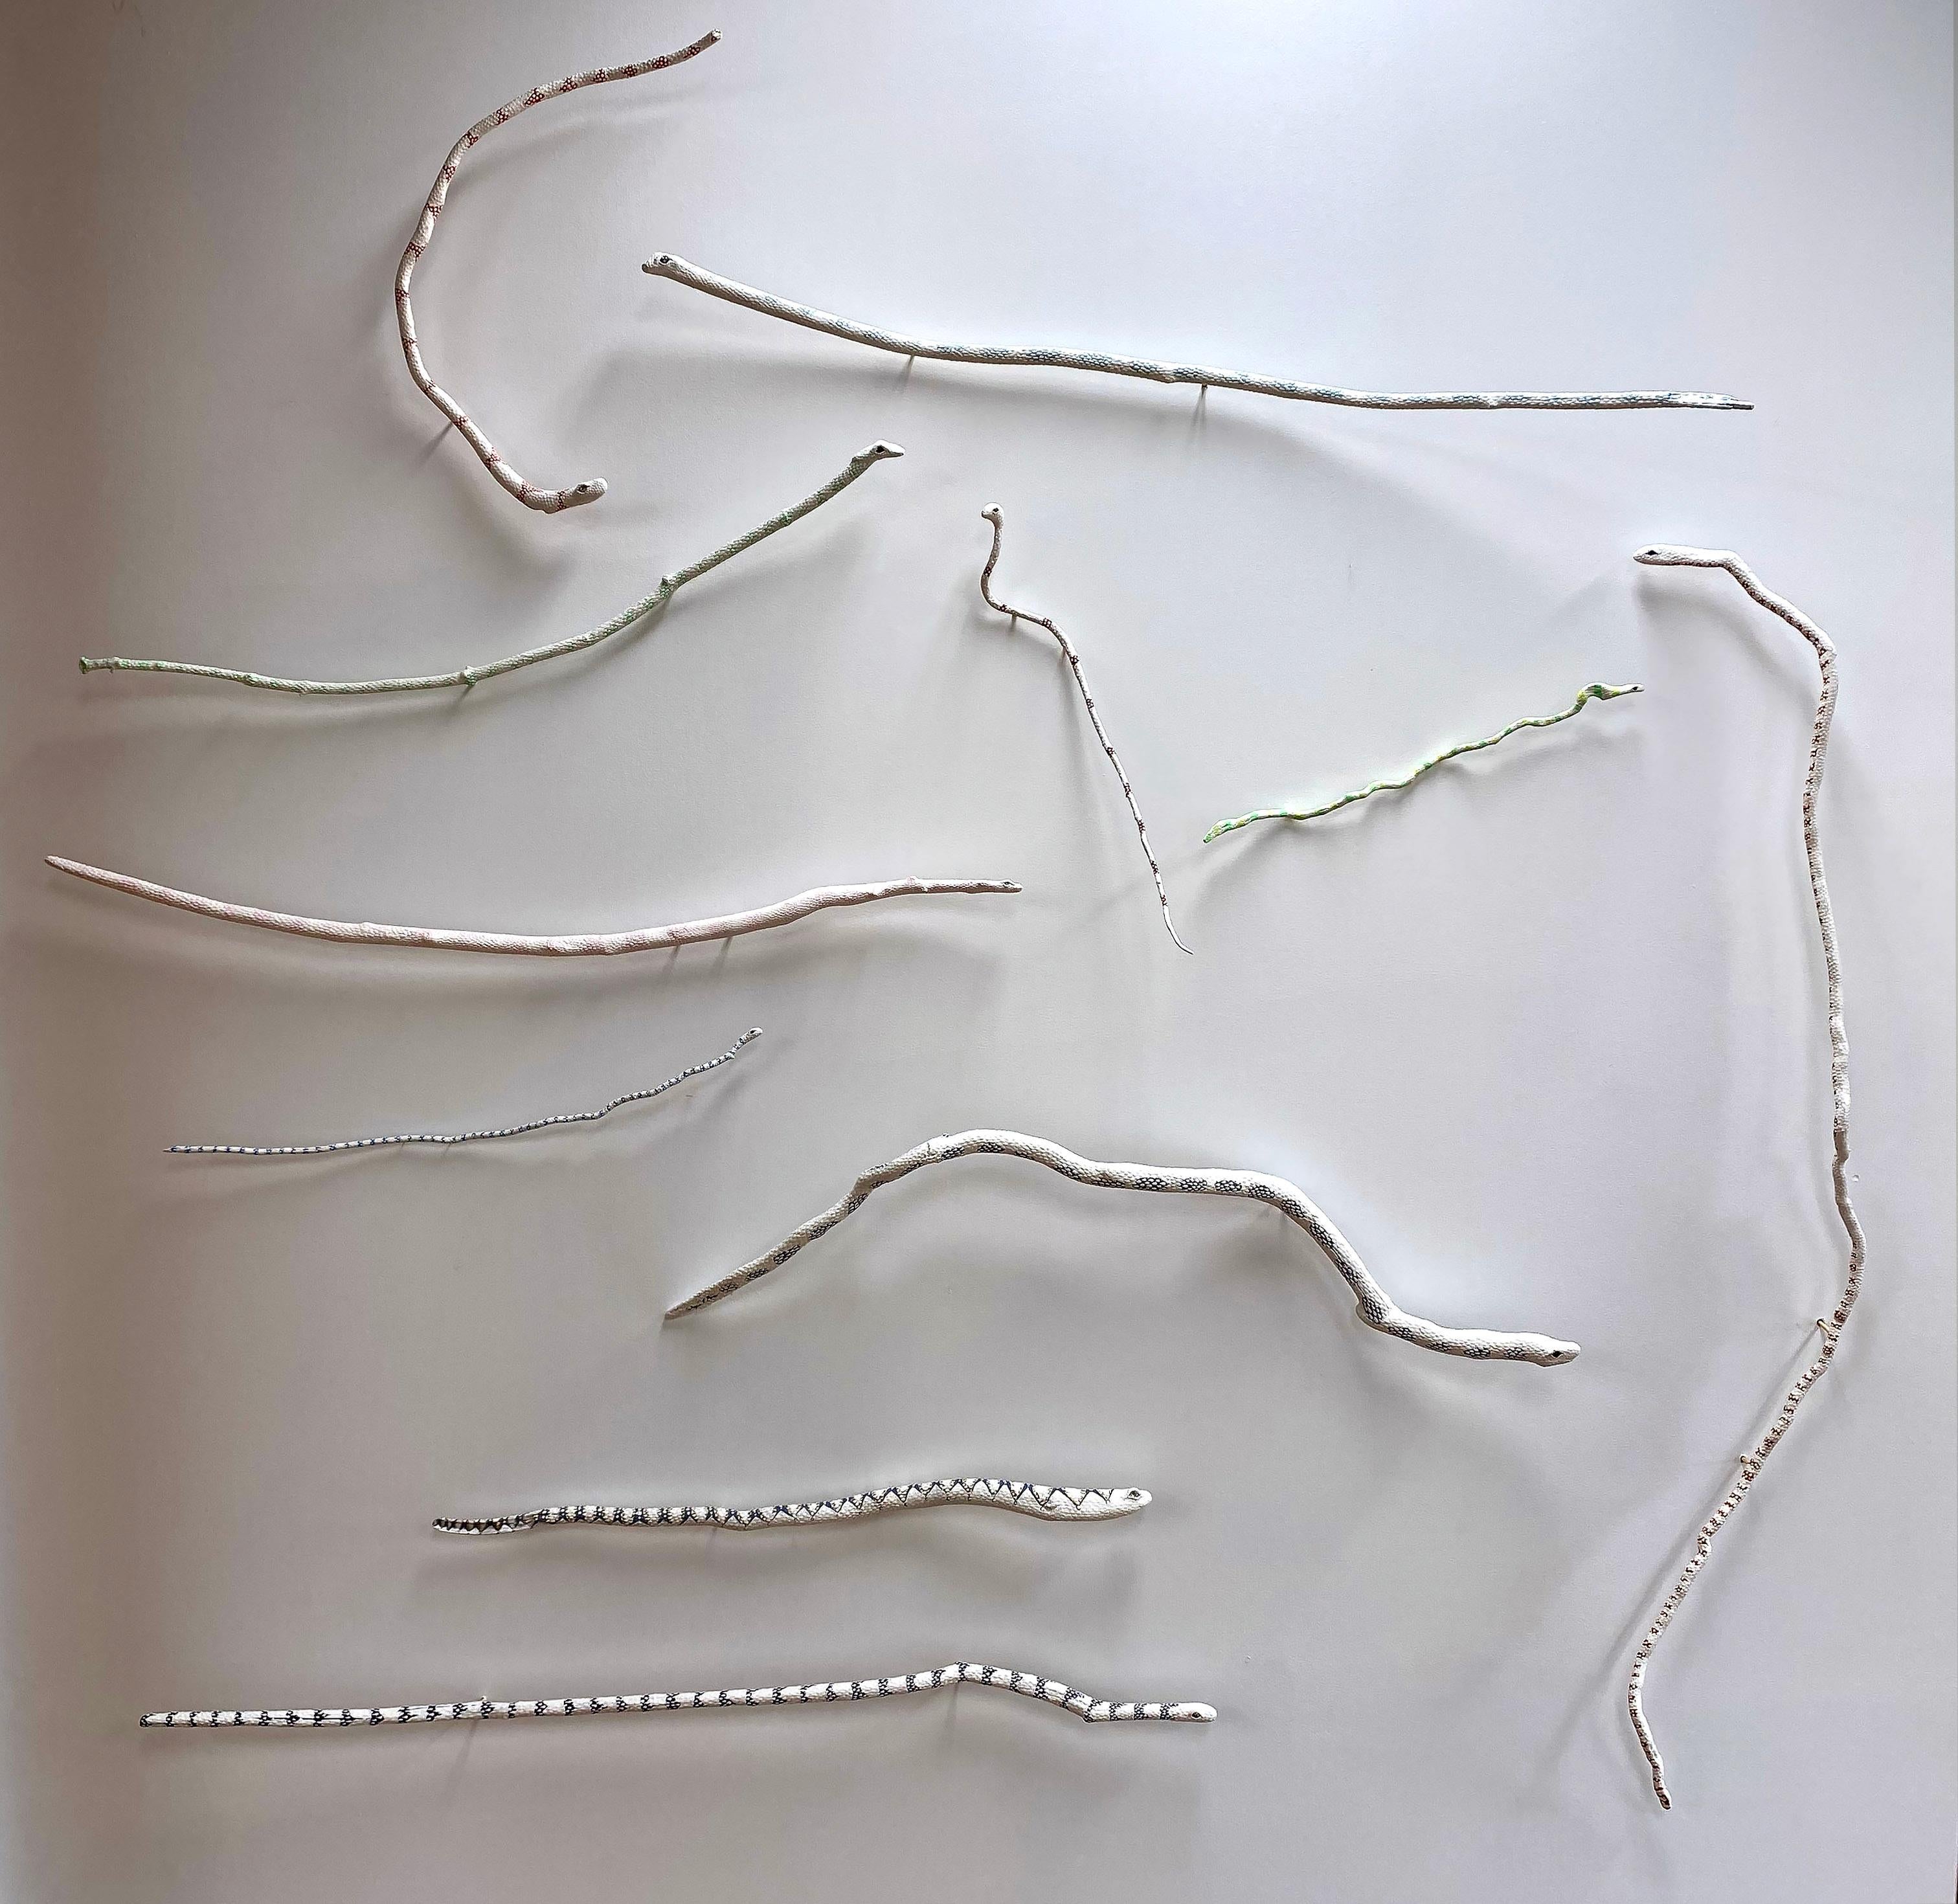 Bethany Krull Figurative Sculpture - Contemporary Wood Paint and Jewels Wall Sculpture Installation Snakes Driftwood